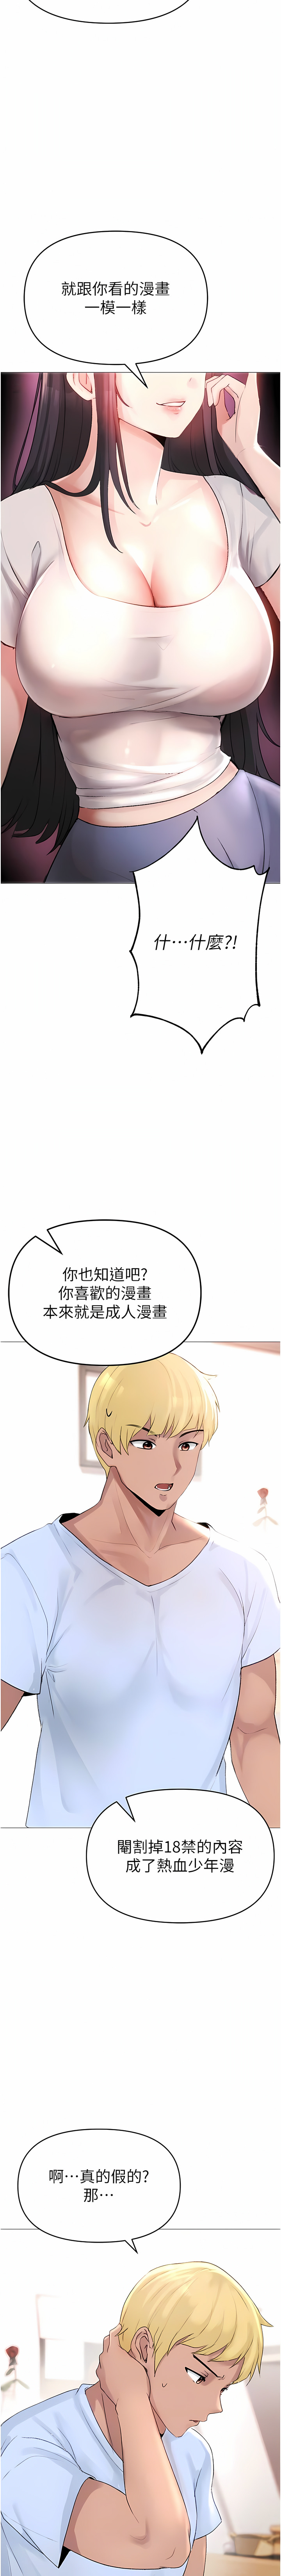 [Chanis]  ↖㊣煞气a猛男㊣↘ | ↖㊣煞氣a猛男㊣↘ 1-39 [Chinese] [Ongoing] - Page 37